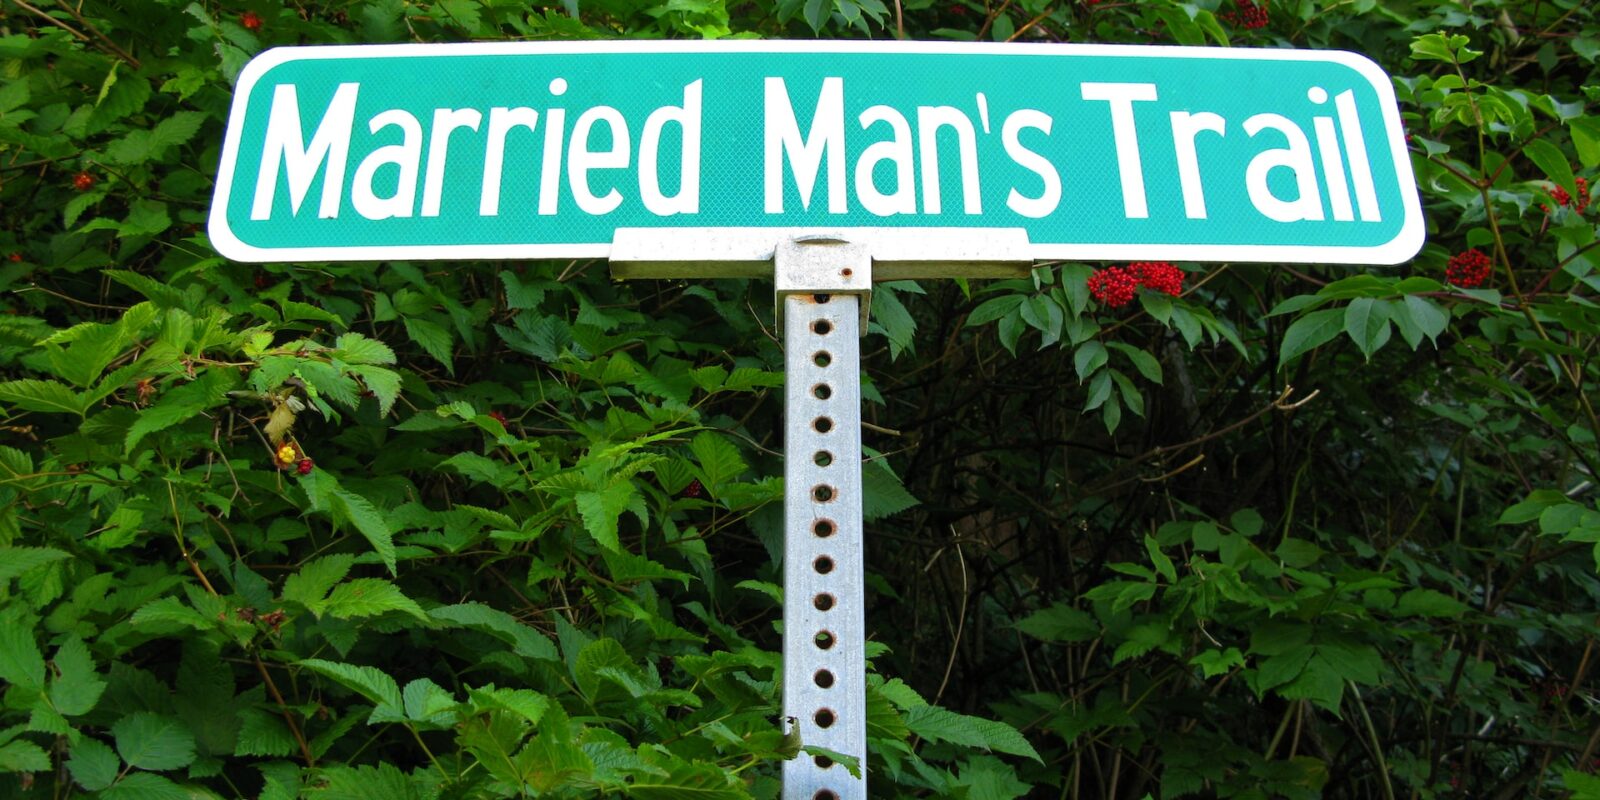 A sign which says married man's trail